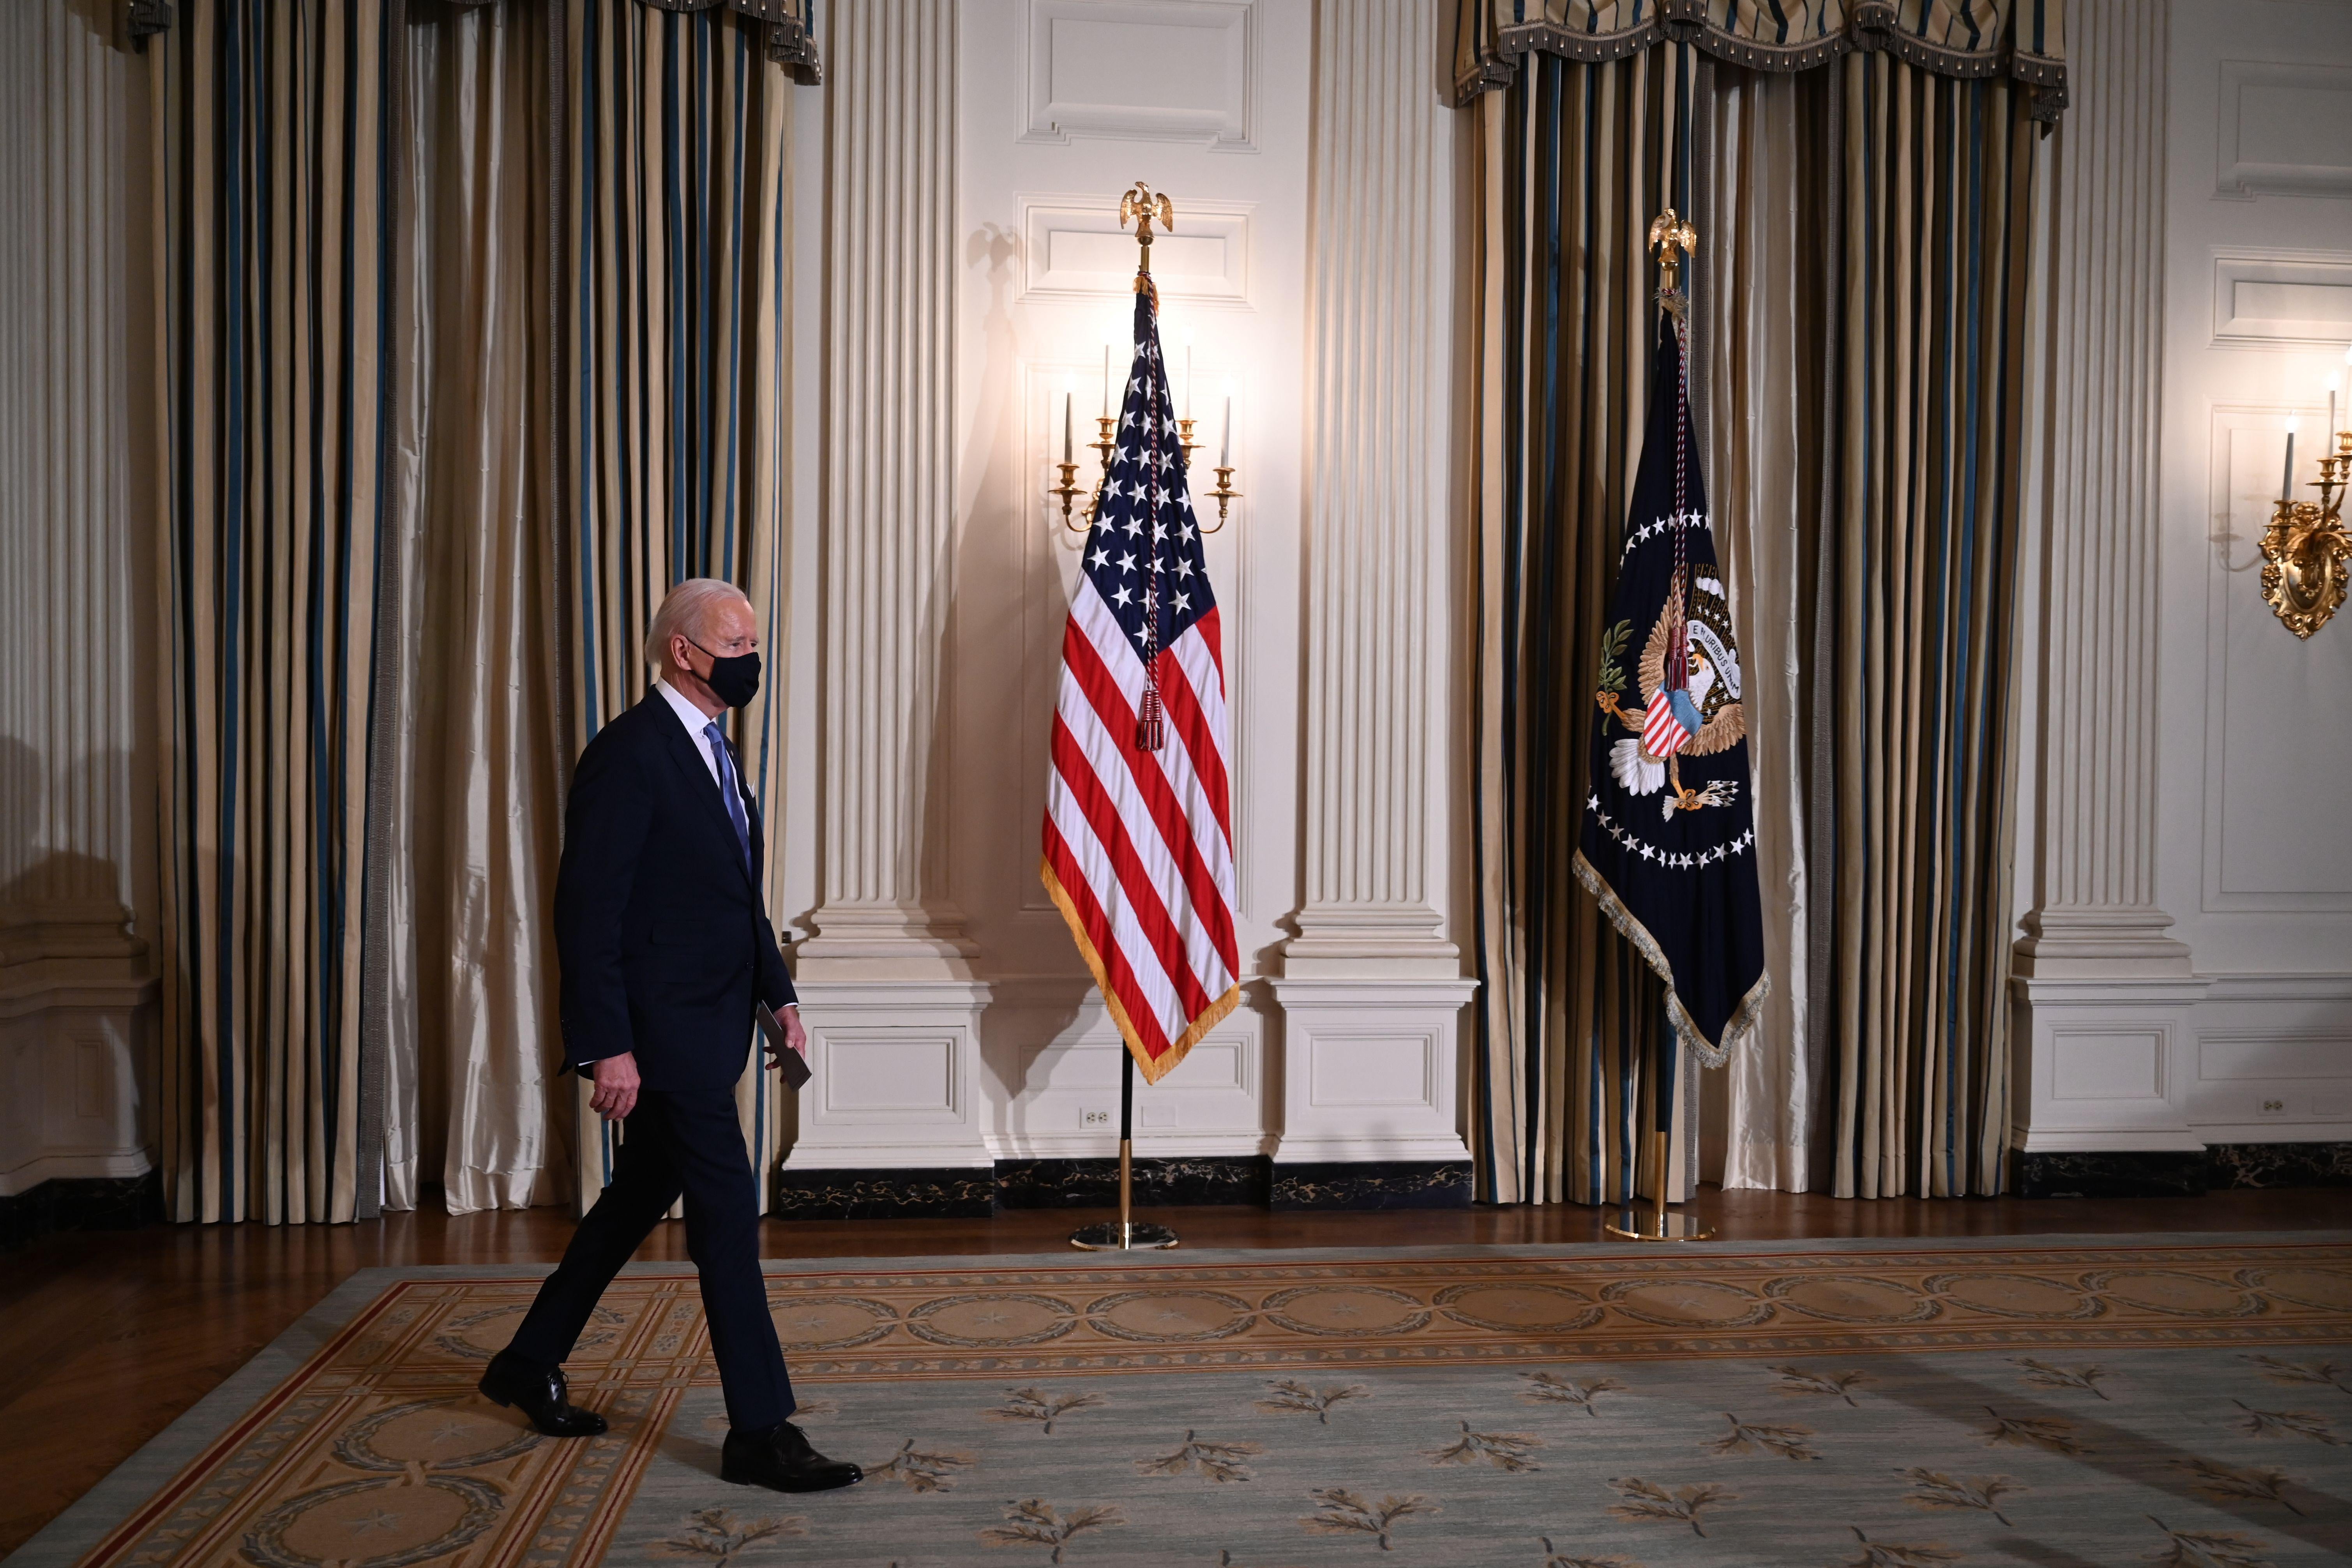 Joe Biden walks into a room in the White House with an American flag.